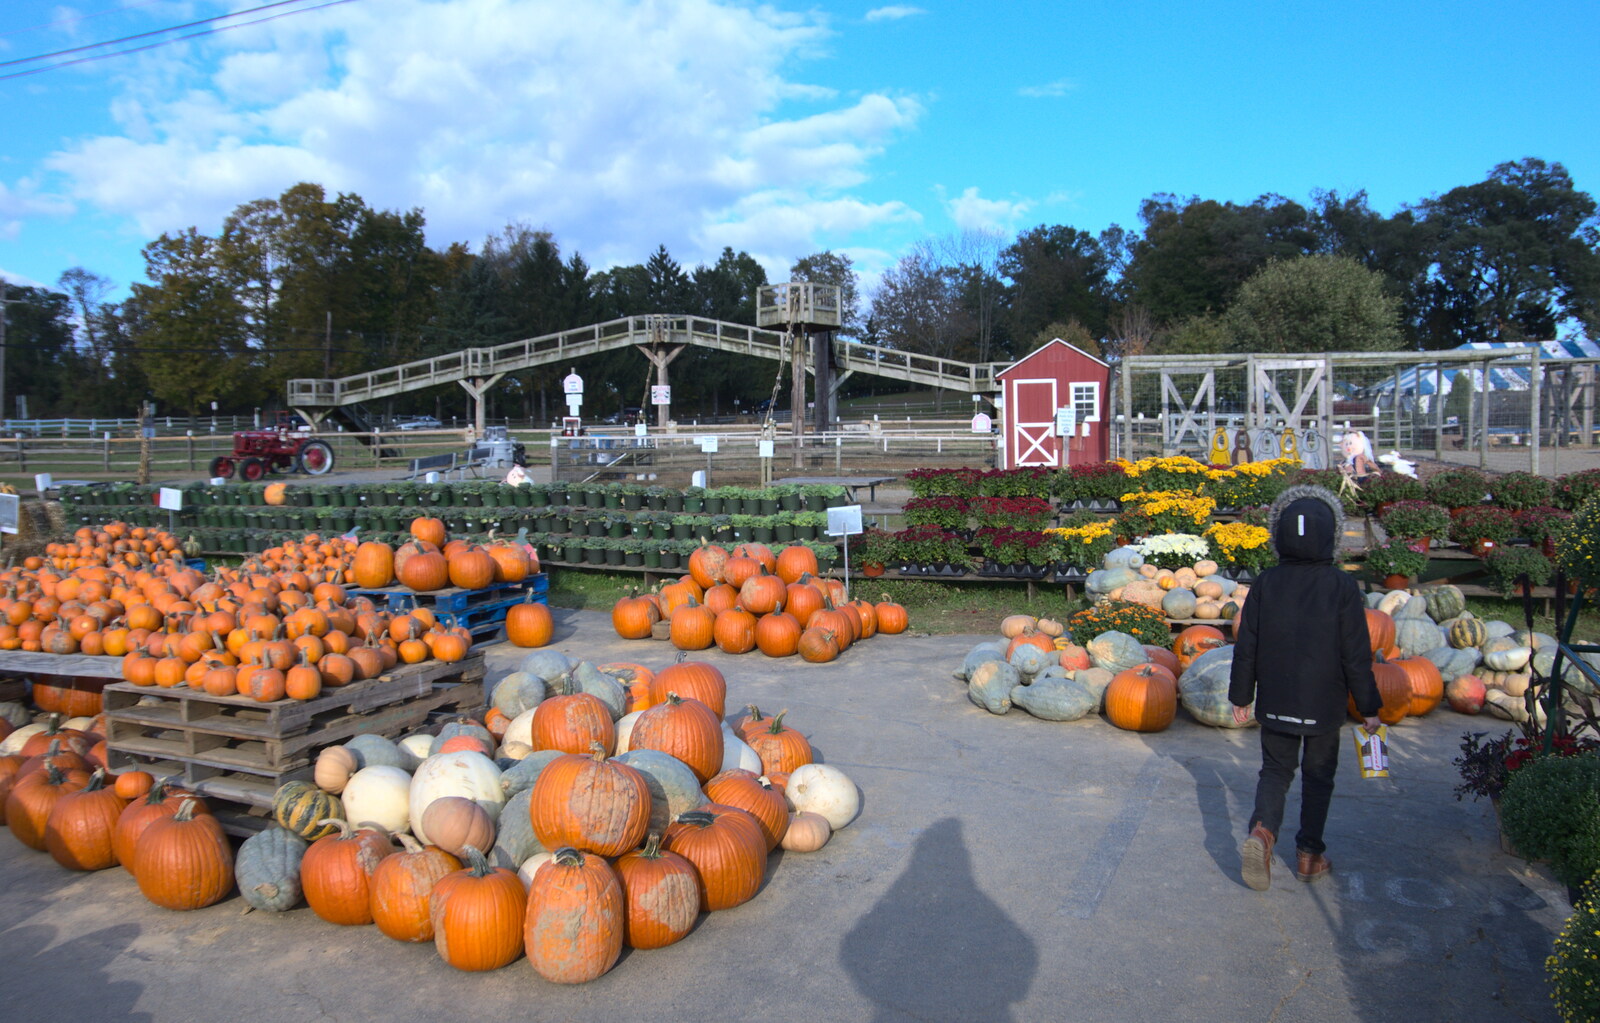 Fred wanders around the pumpkins from Pumpkin Picking at Alstede Farm, Chester, Morris County, New Jersey - 24th October 2018